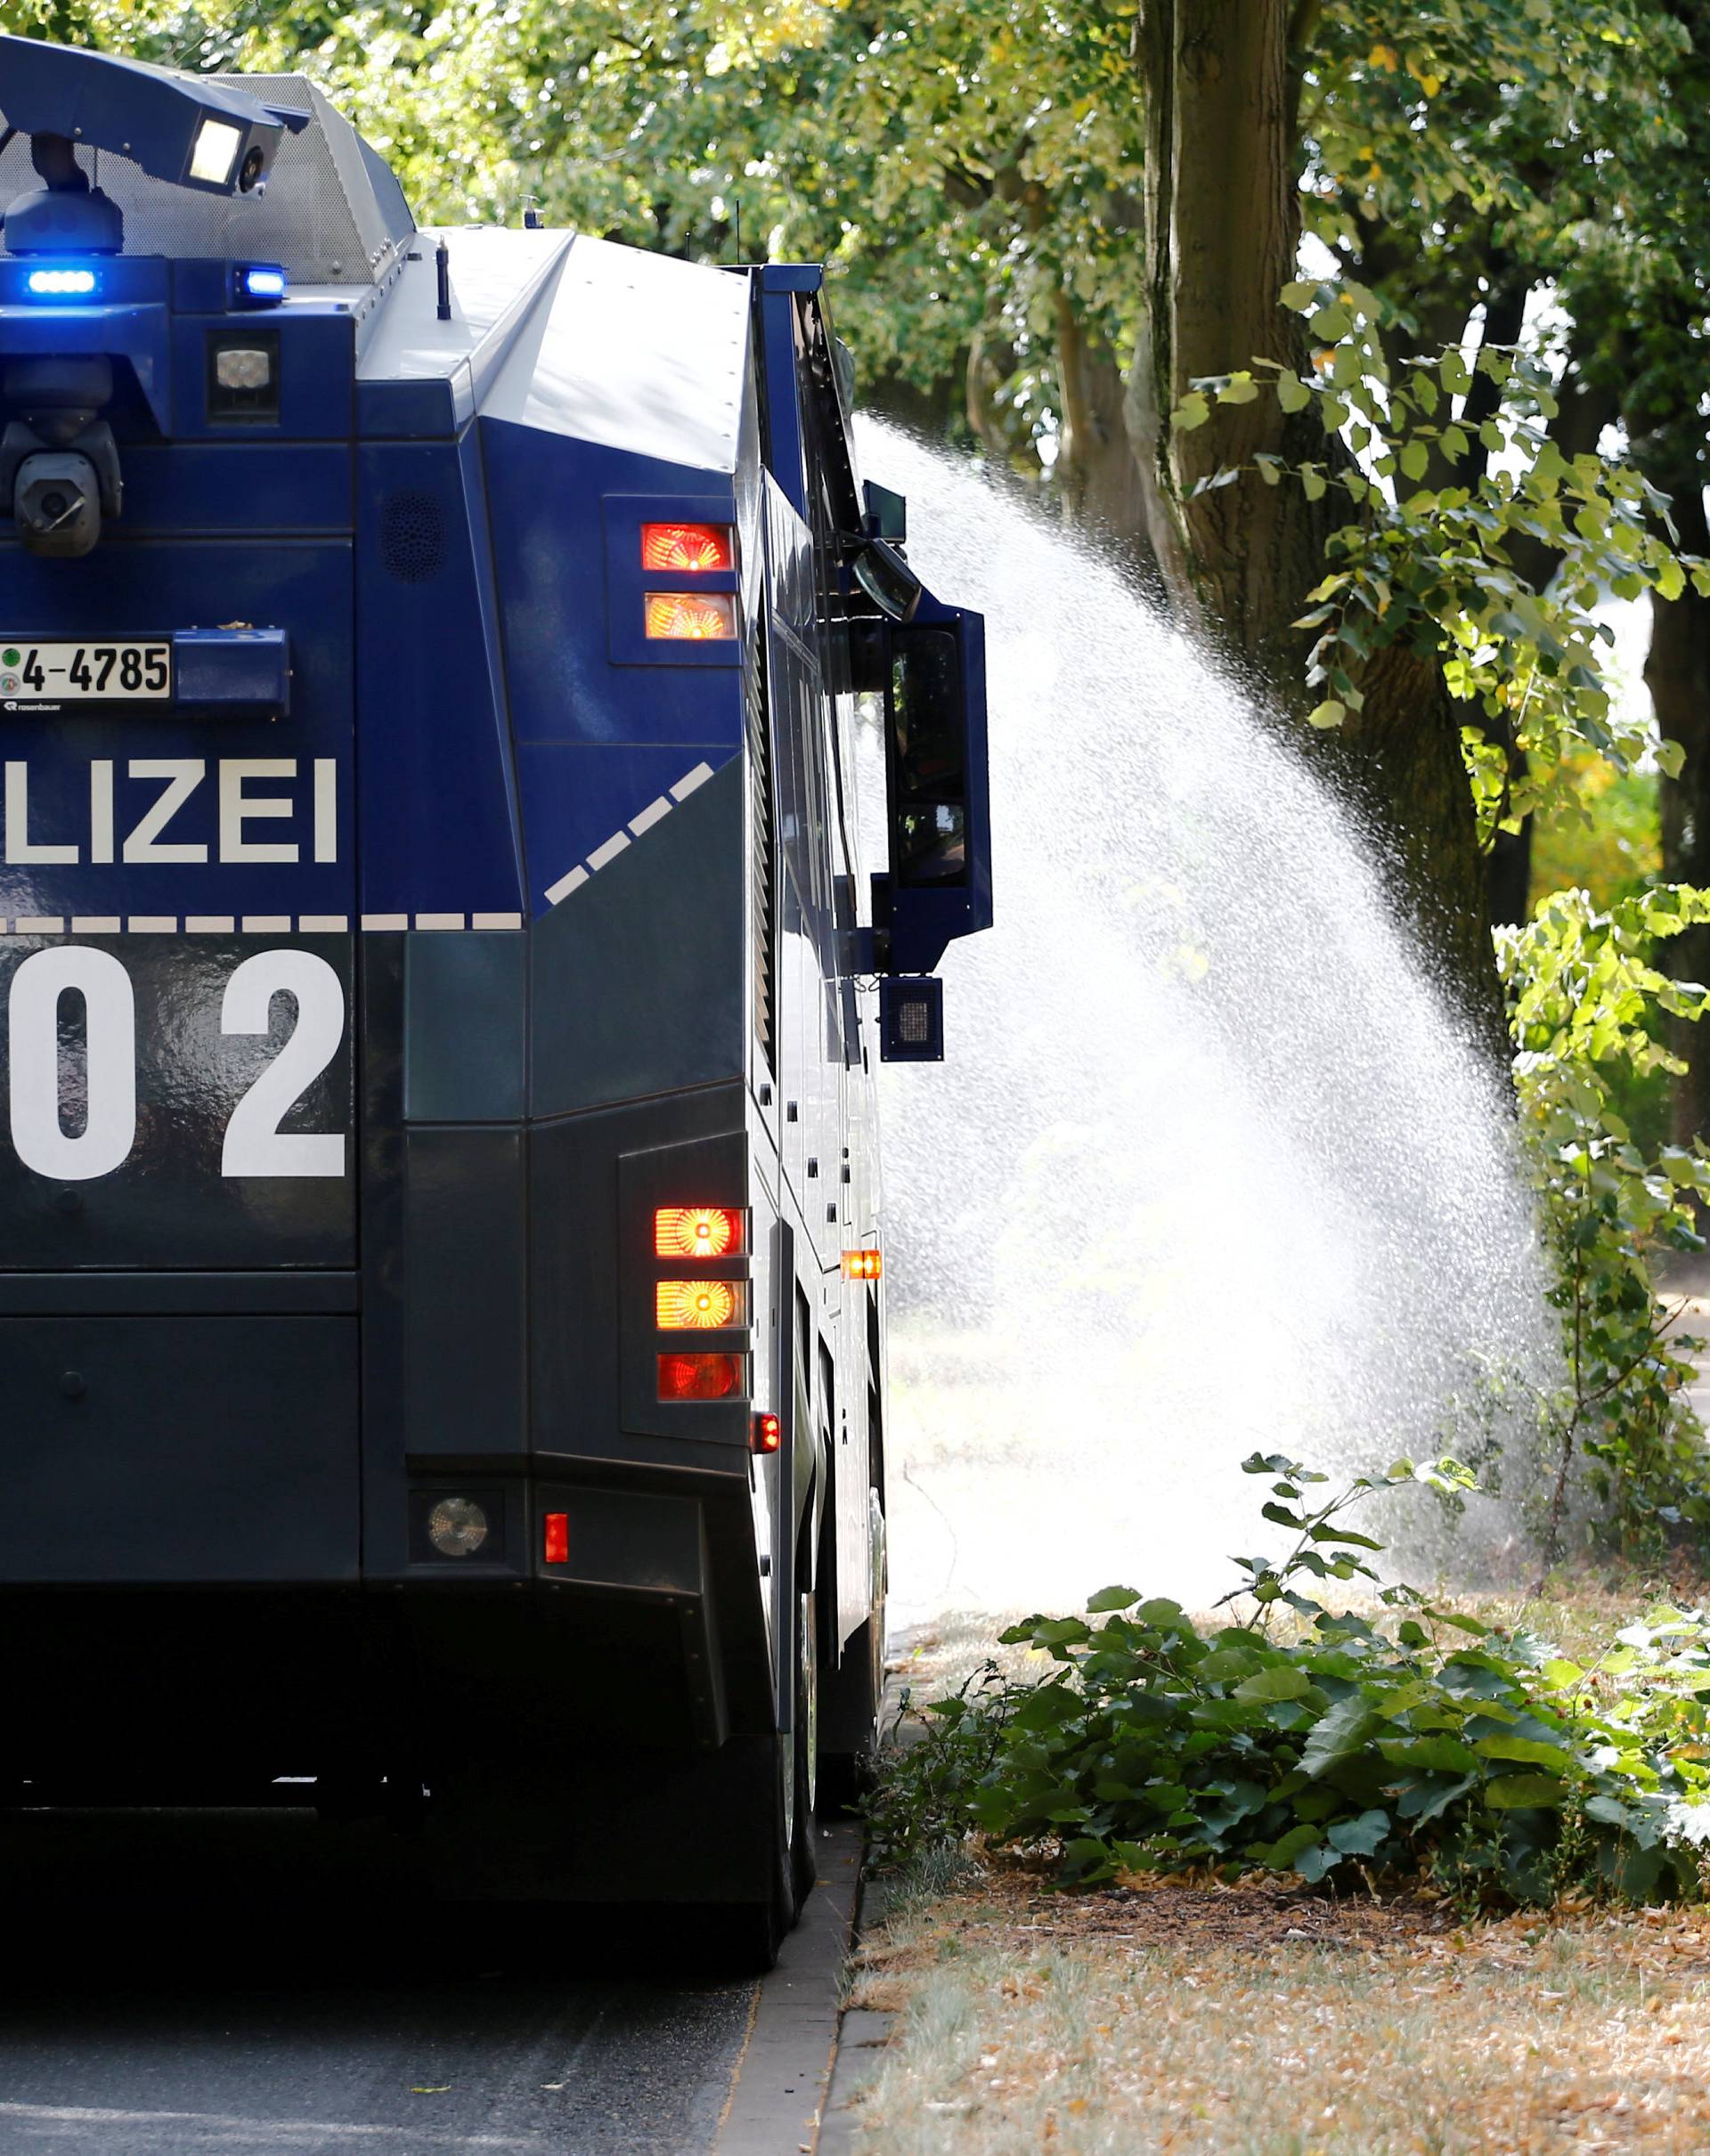 Police water cannon is used to hose water on alley trees in Bochum